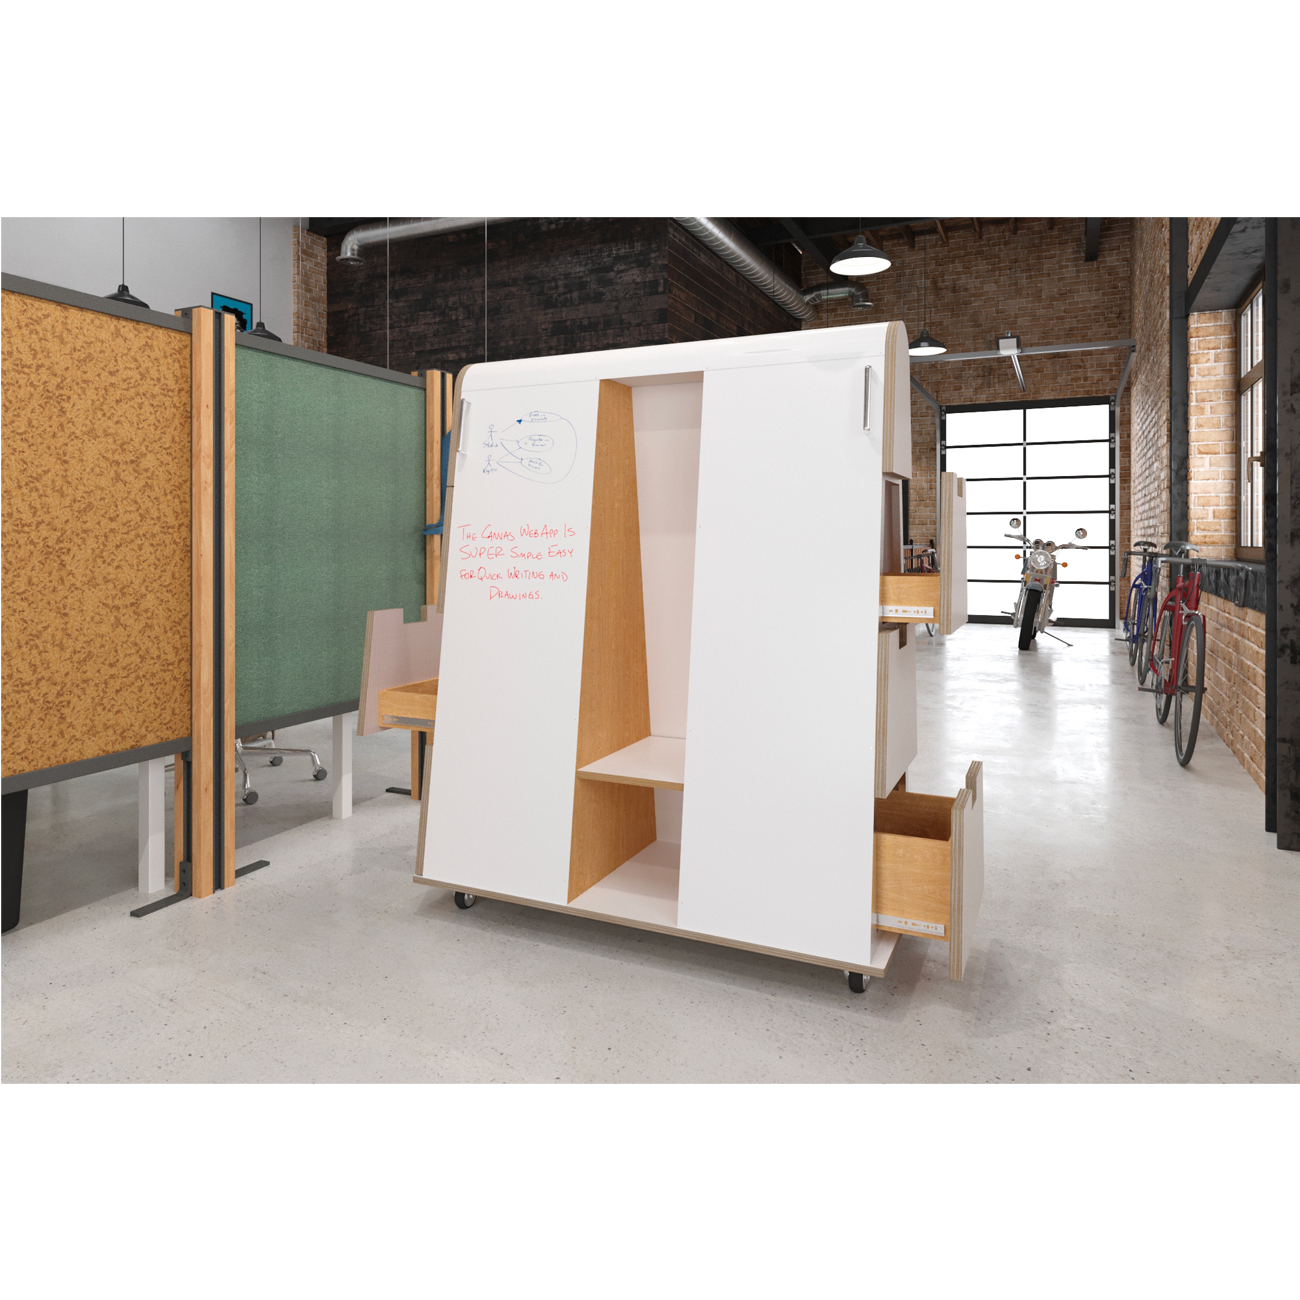 open floor plan workplace collaborative mobile whiteboard